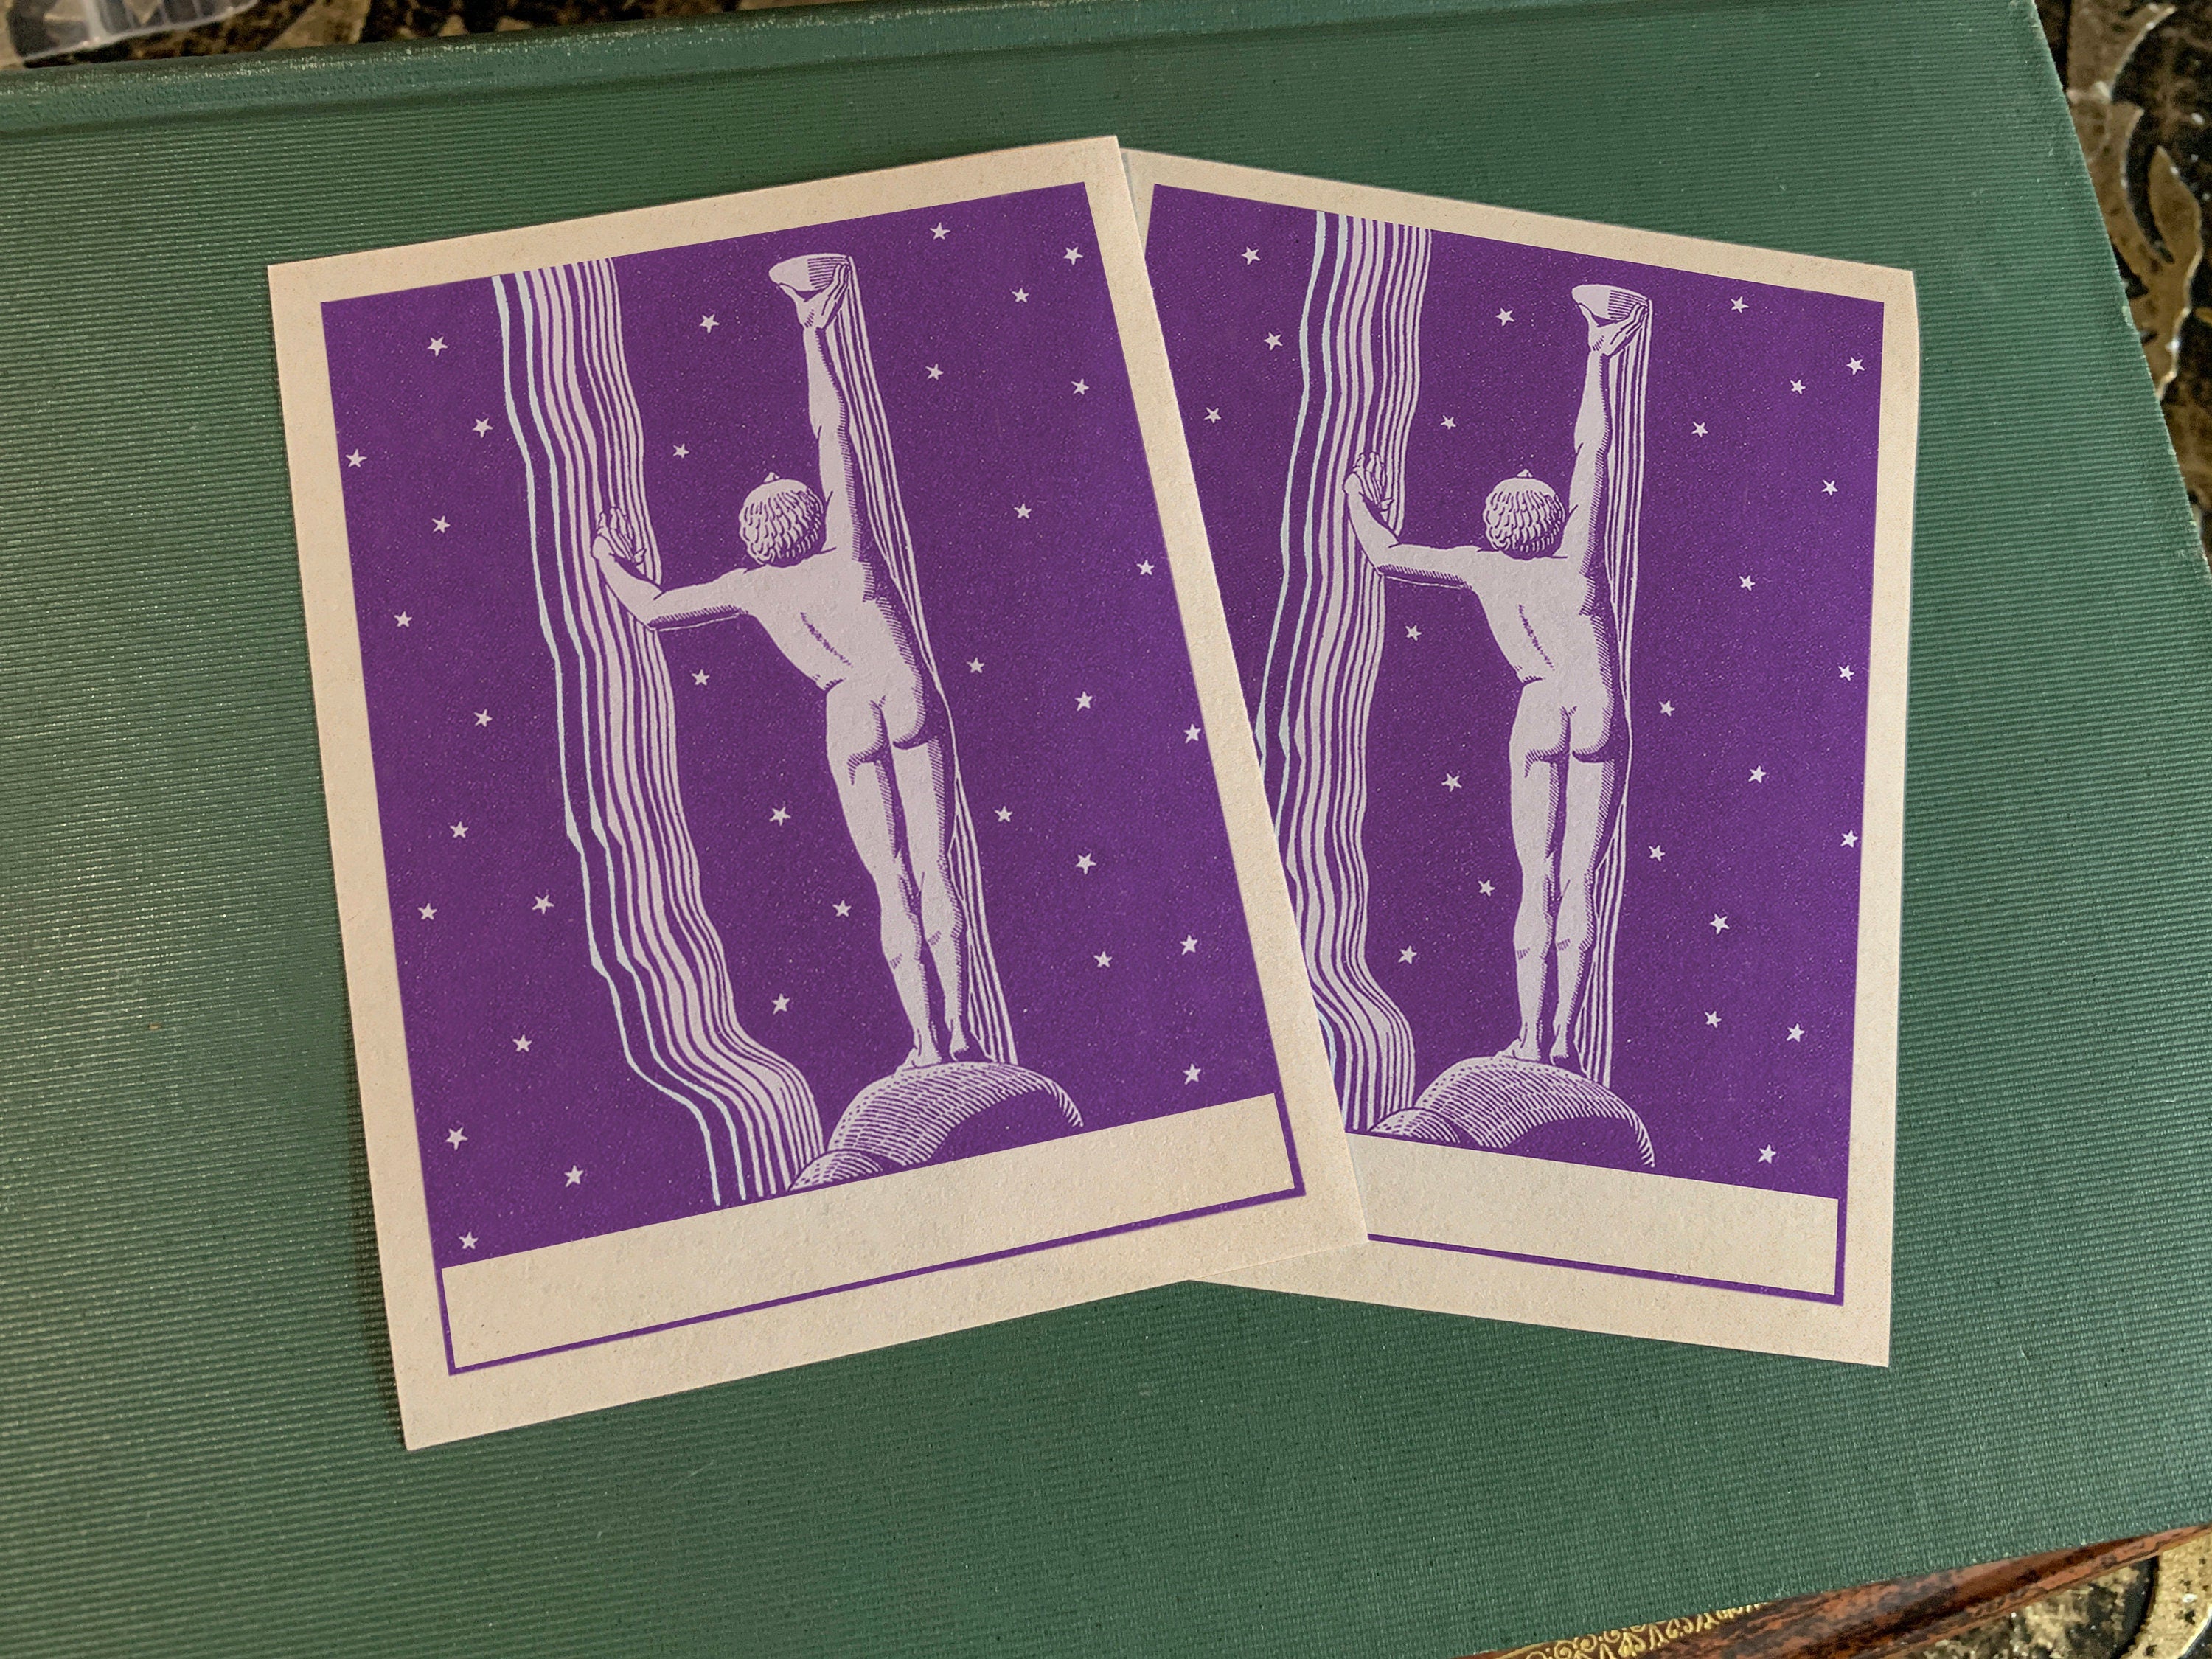 Star Catcher by Rockwell Kent, Personalized Ex-Libris Bookplates, Crafted on Traditional Gummed Paper, 3in x 4in, Set of 30, 3 Colors